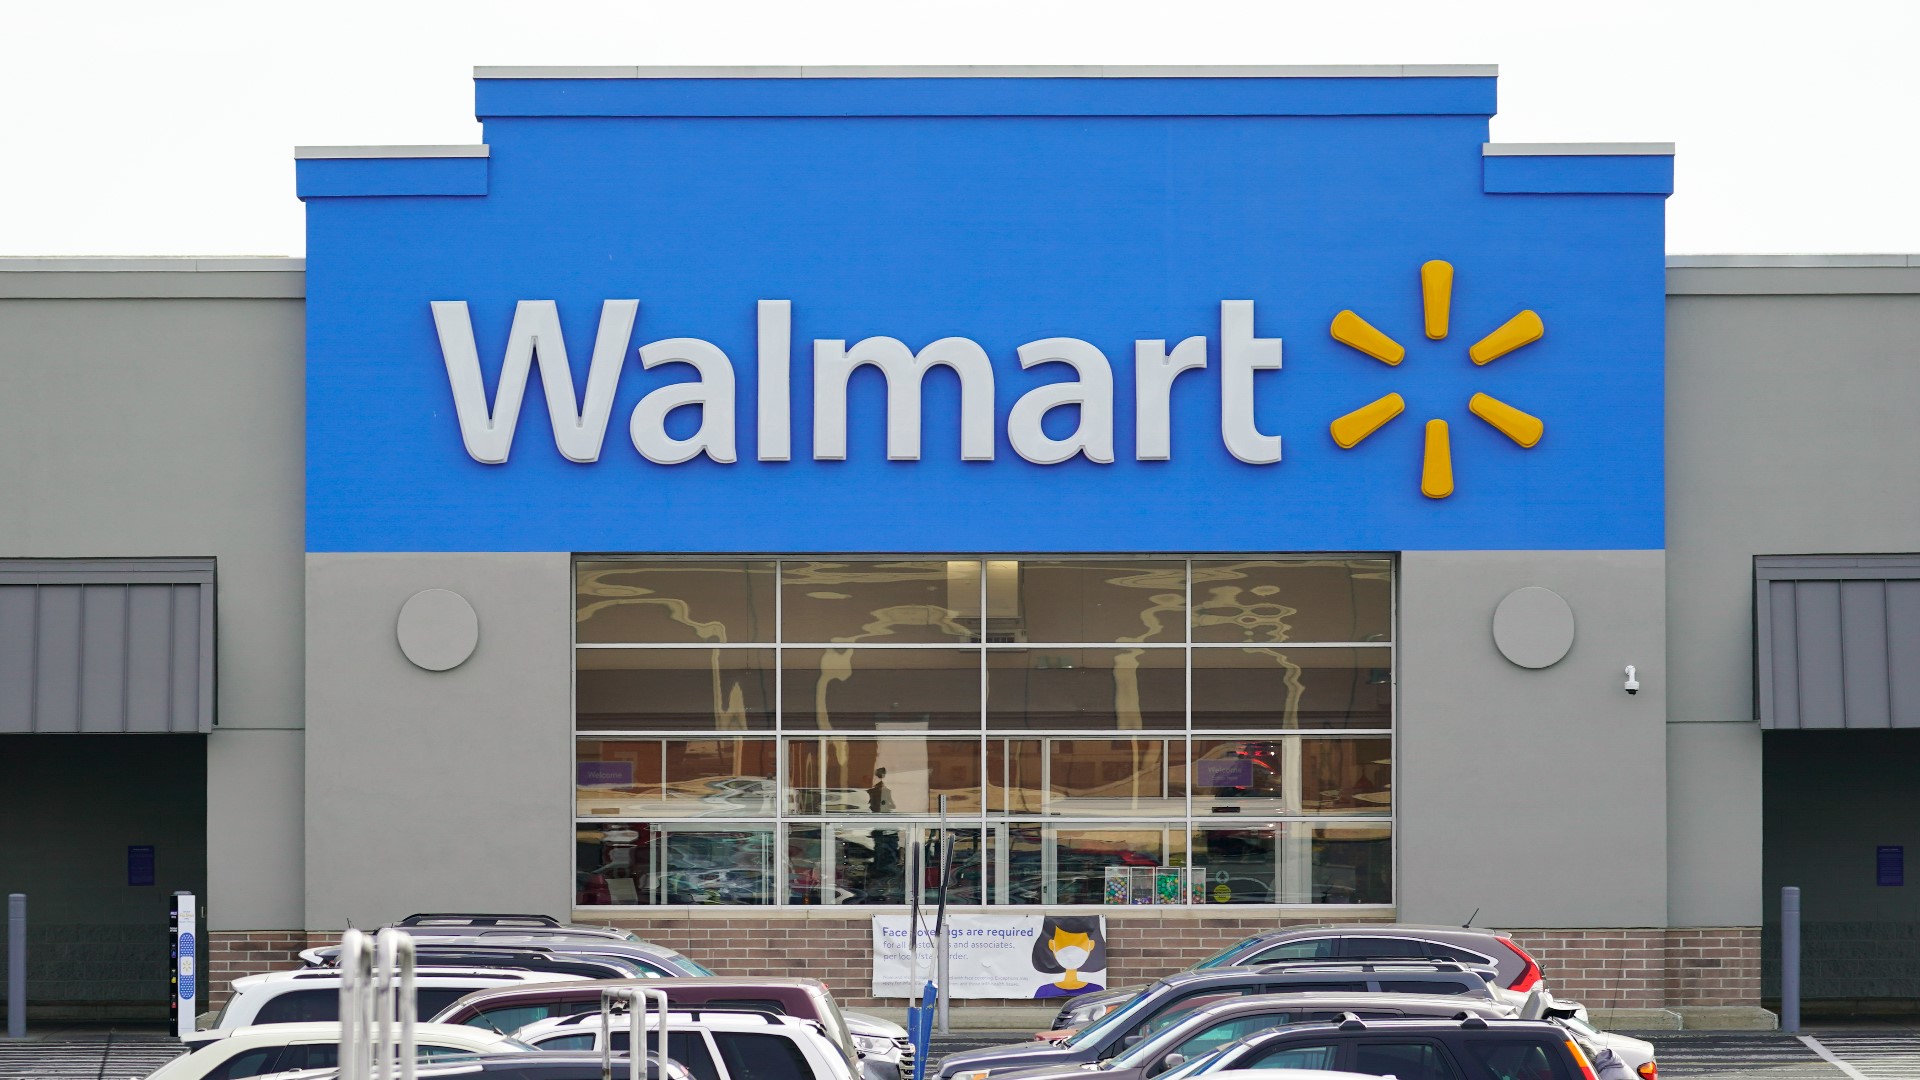 Walmart is restructuring several of its departments within the corporate structure which will result in the loss of about 200 jobs in their offices.